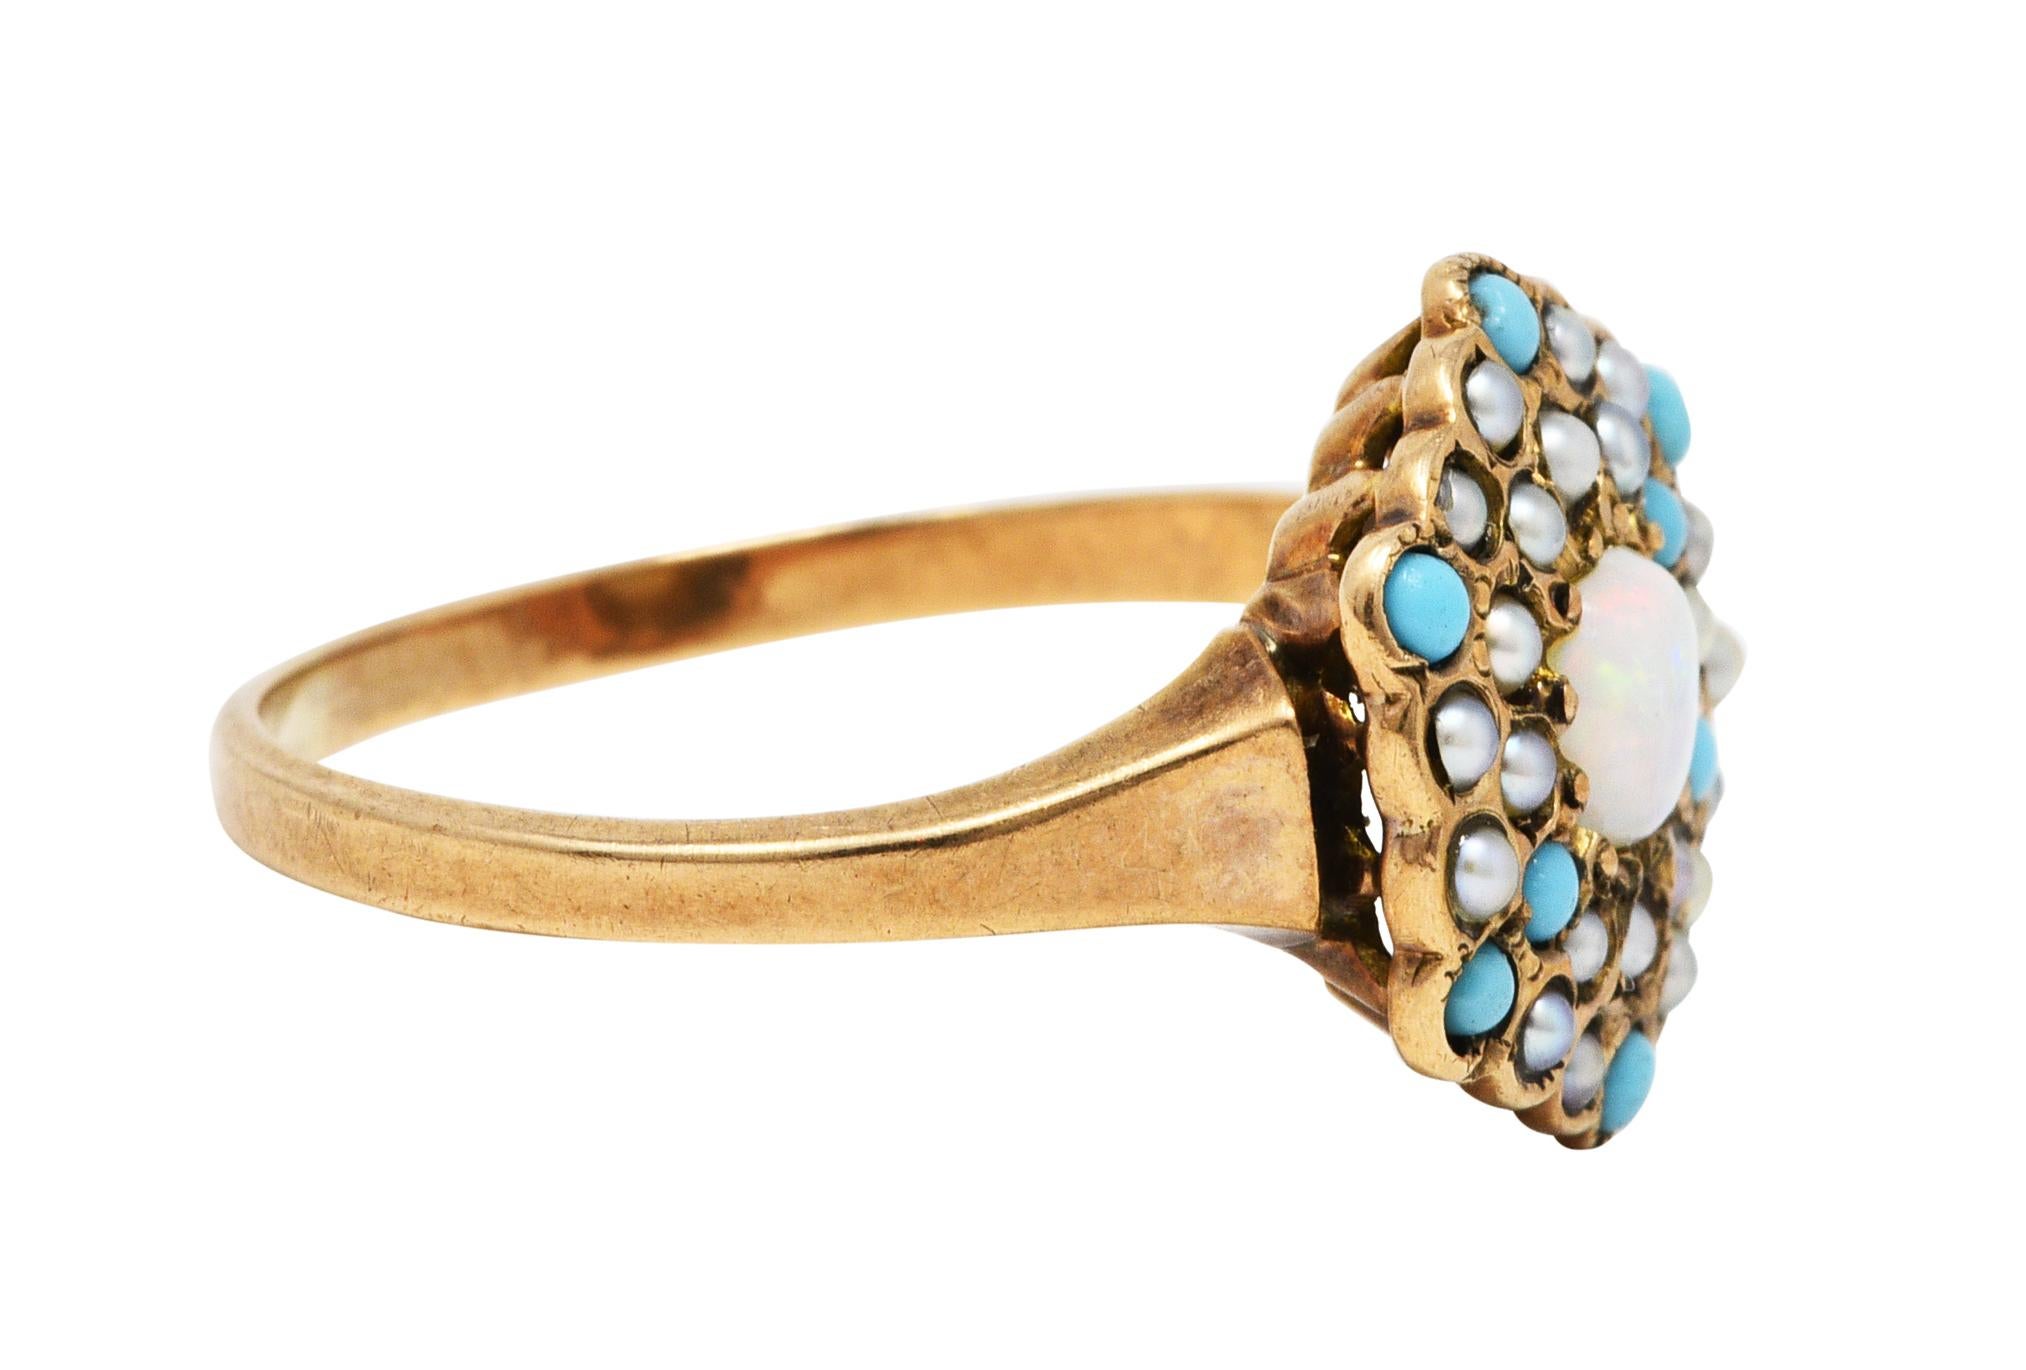 Cluster ring centers a 4.0 mm round opal cabochon

White in body color with strong spectral play-of-color with broad yellow/green flash

Surrounded by round natural freshwater seed pearls and turquoise cabochons

Radiating outward in a burst